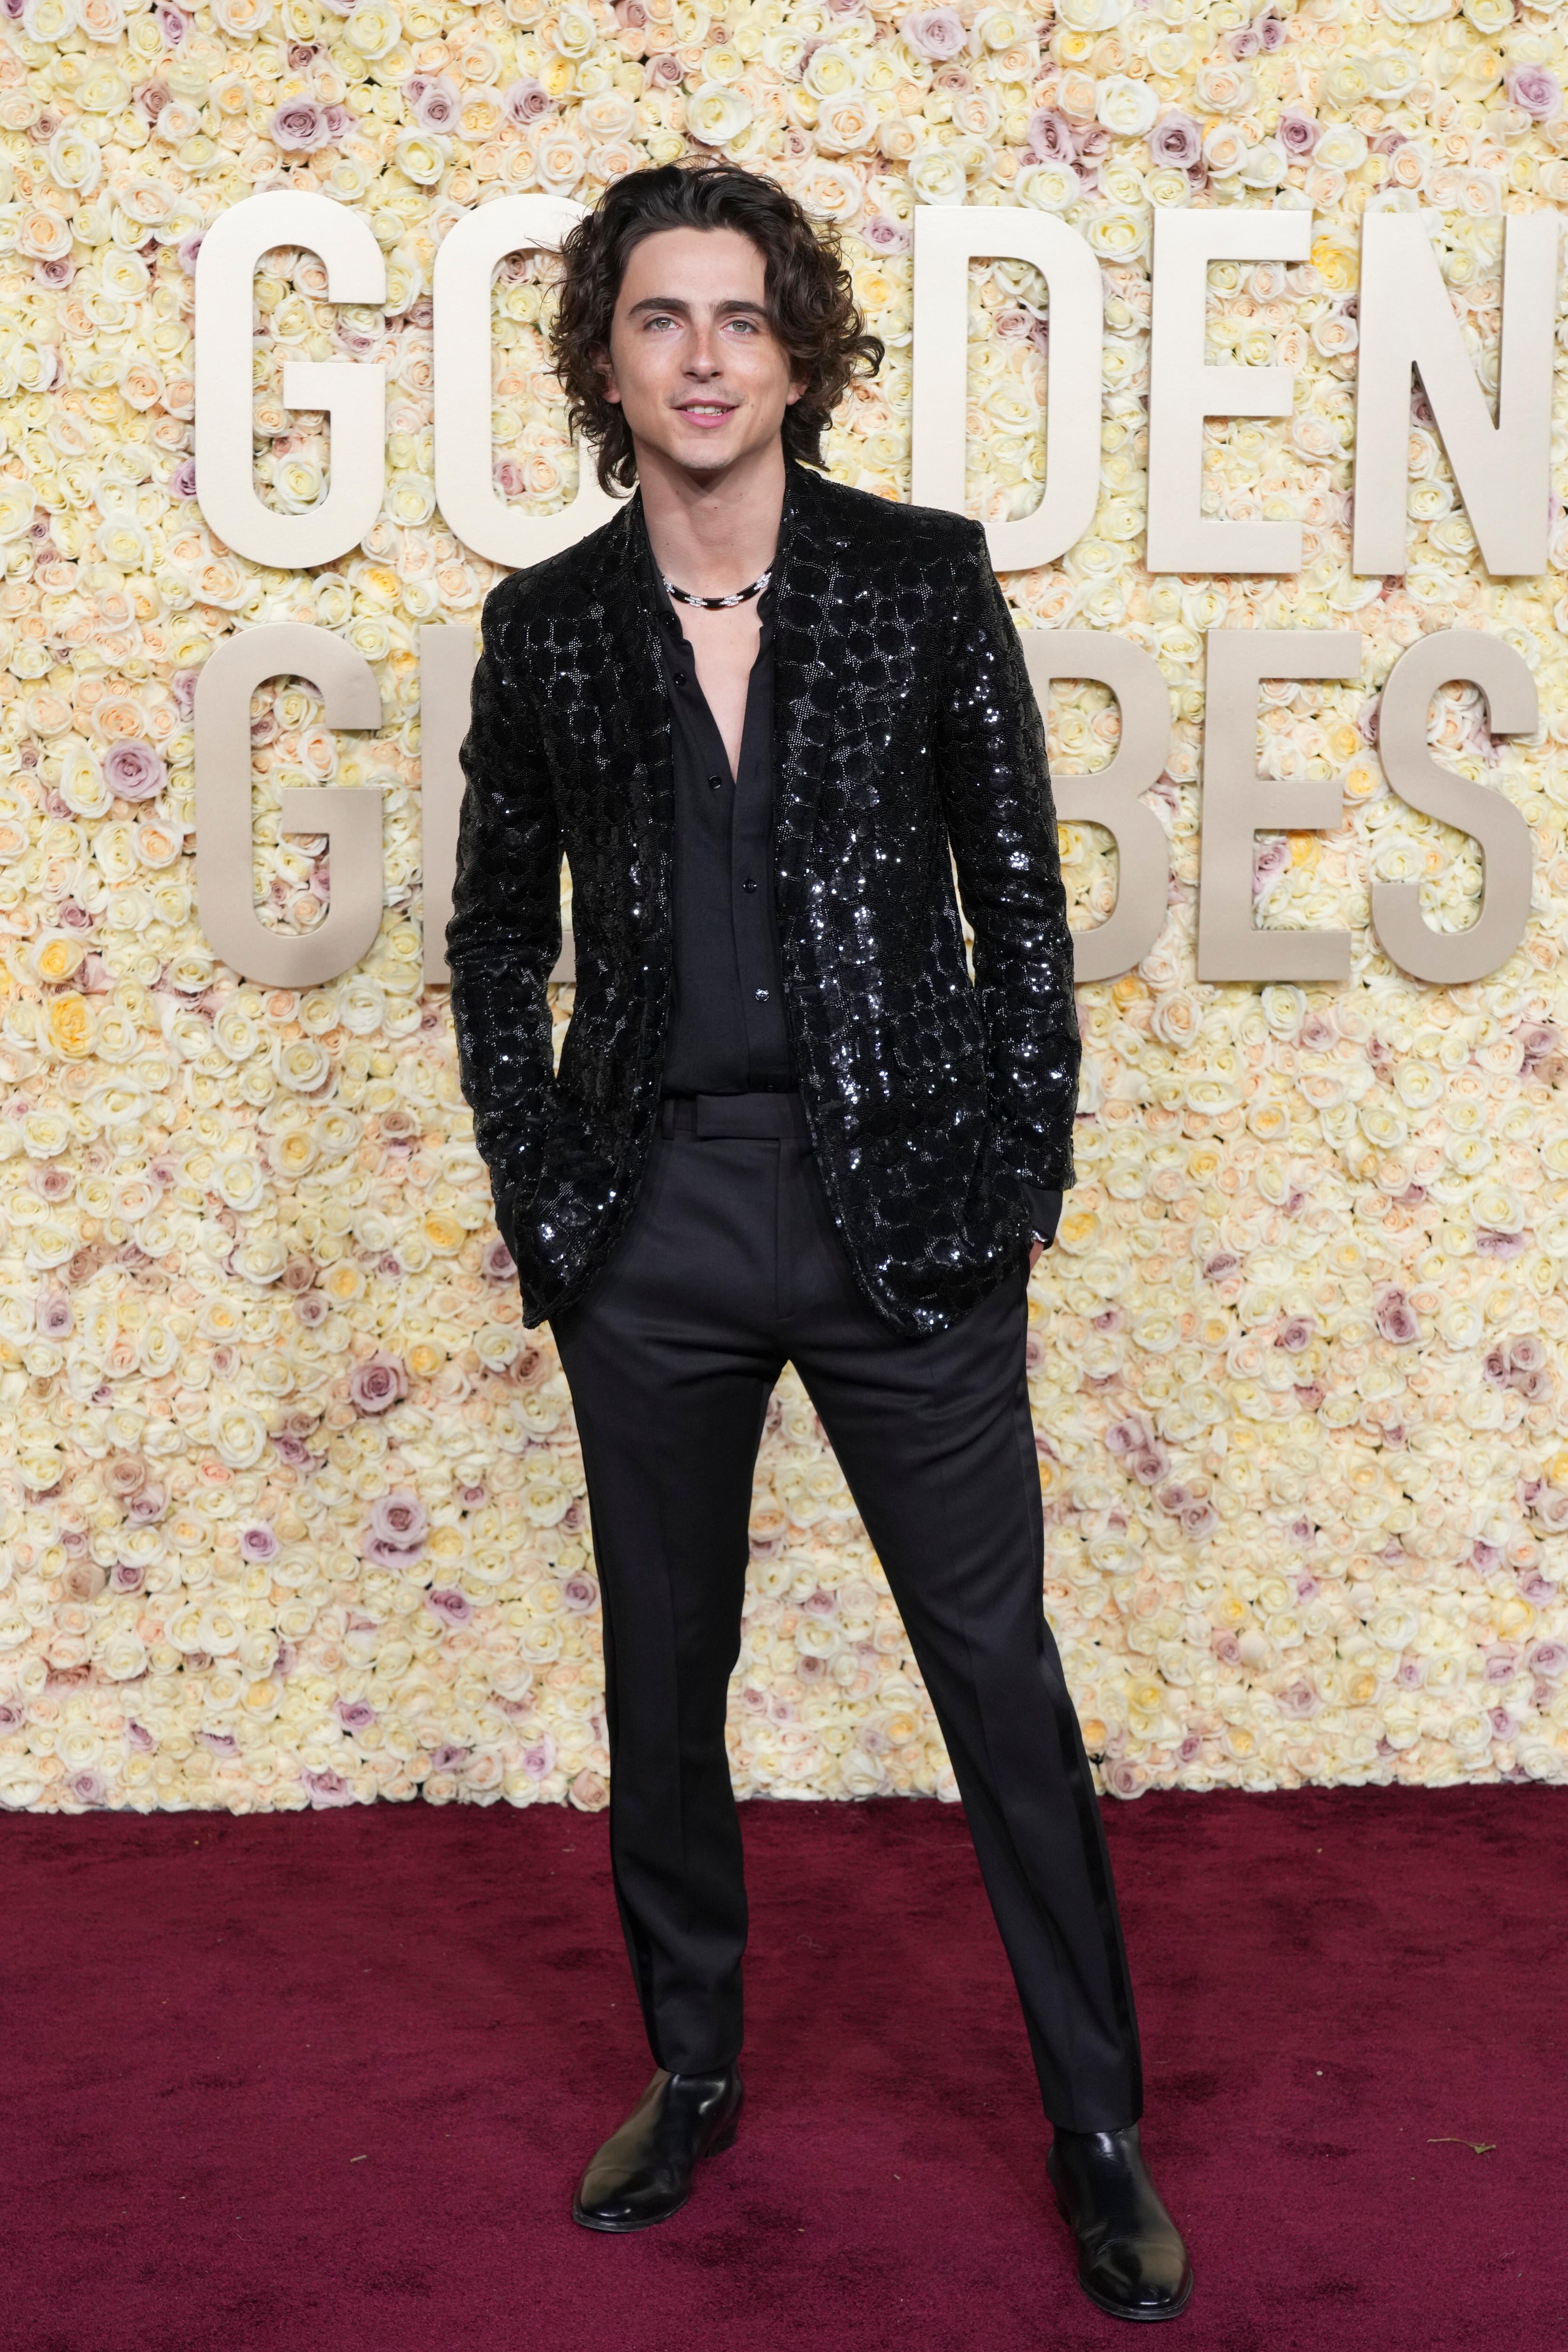 Actor Timothee Chalamet wearing a black suit with a shiny jacket